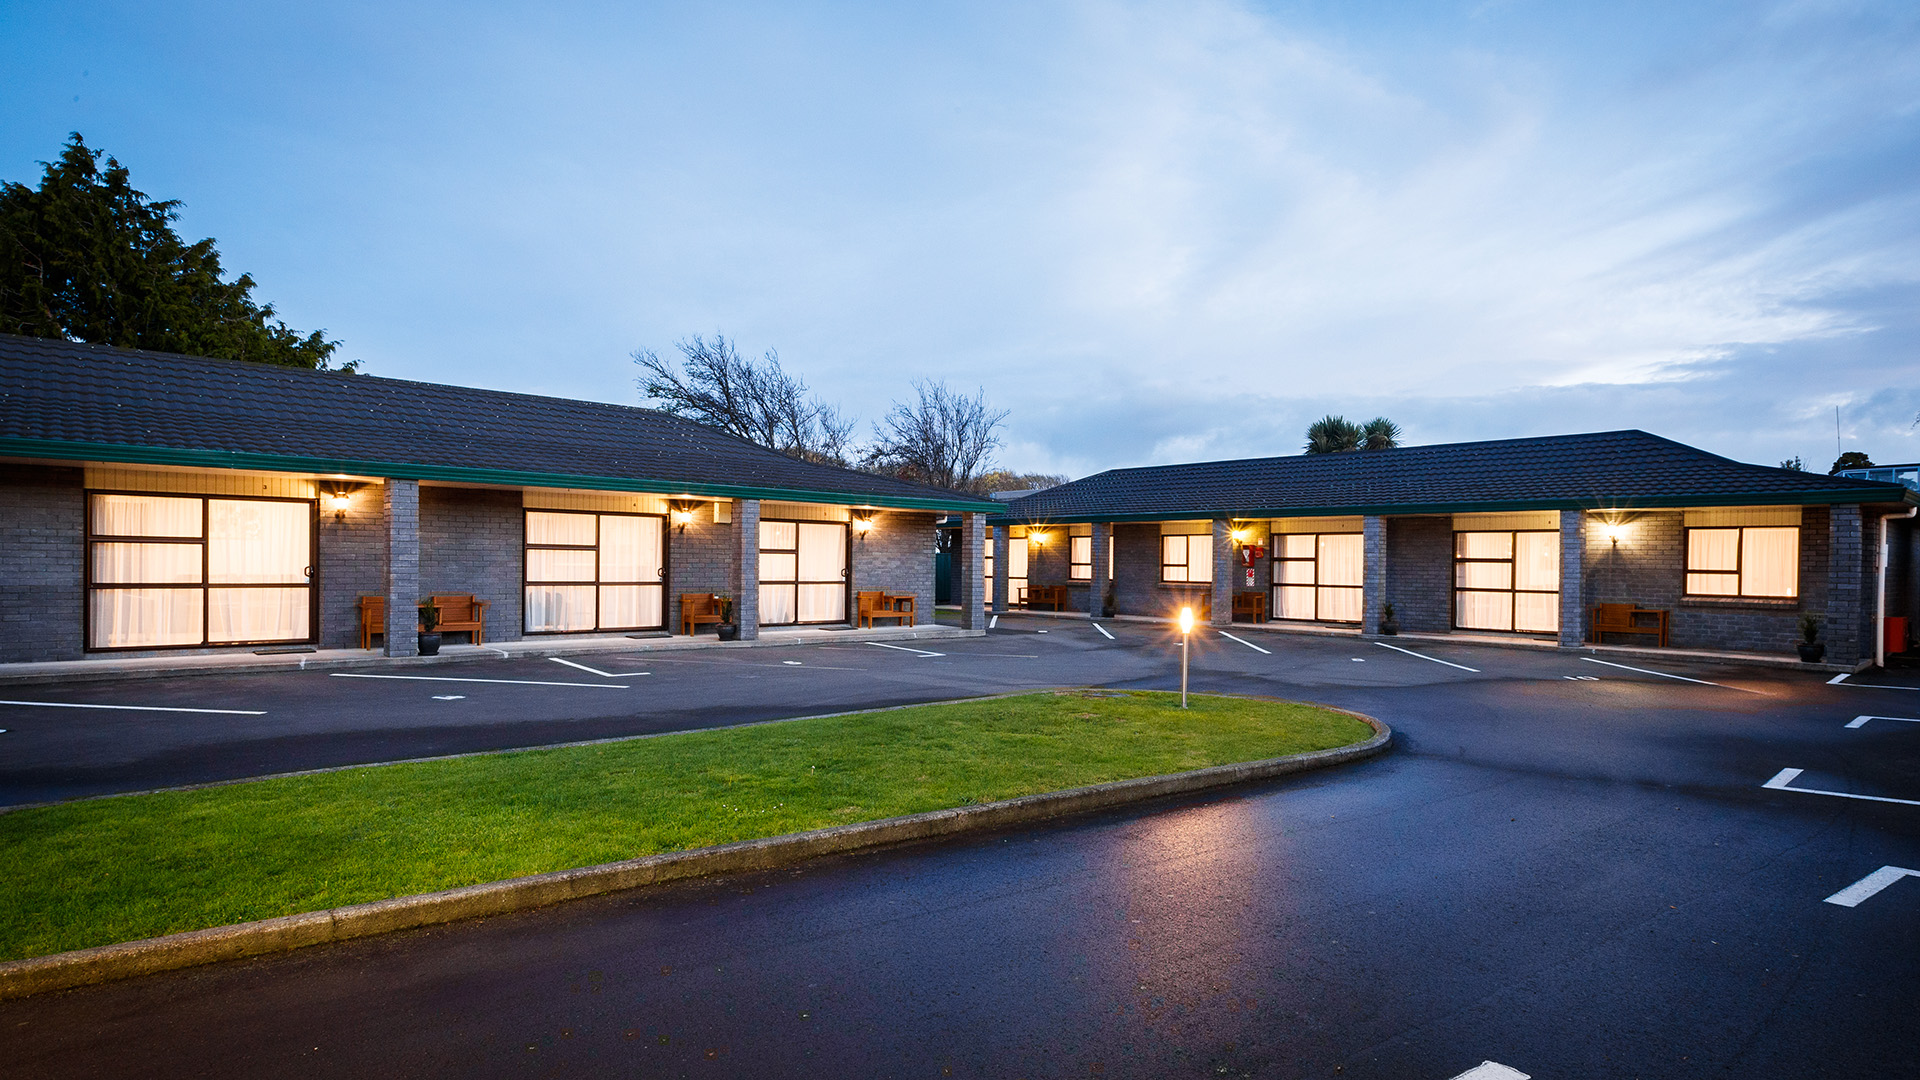 Read or Write Guest Reviews for Avenue Motel Palmerston North